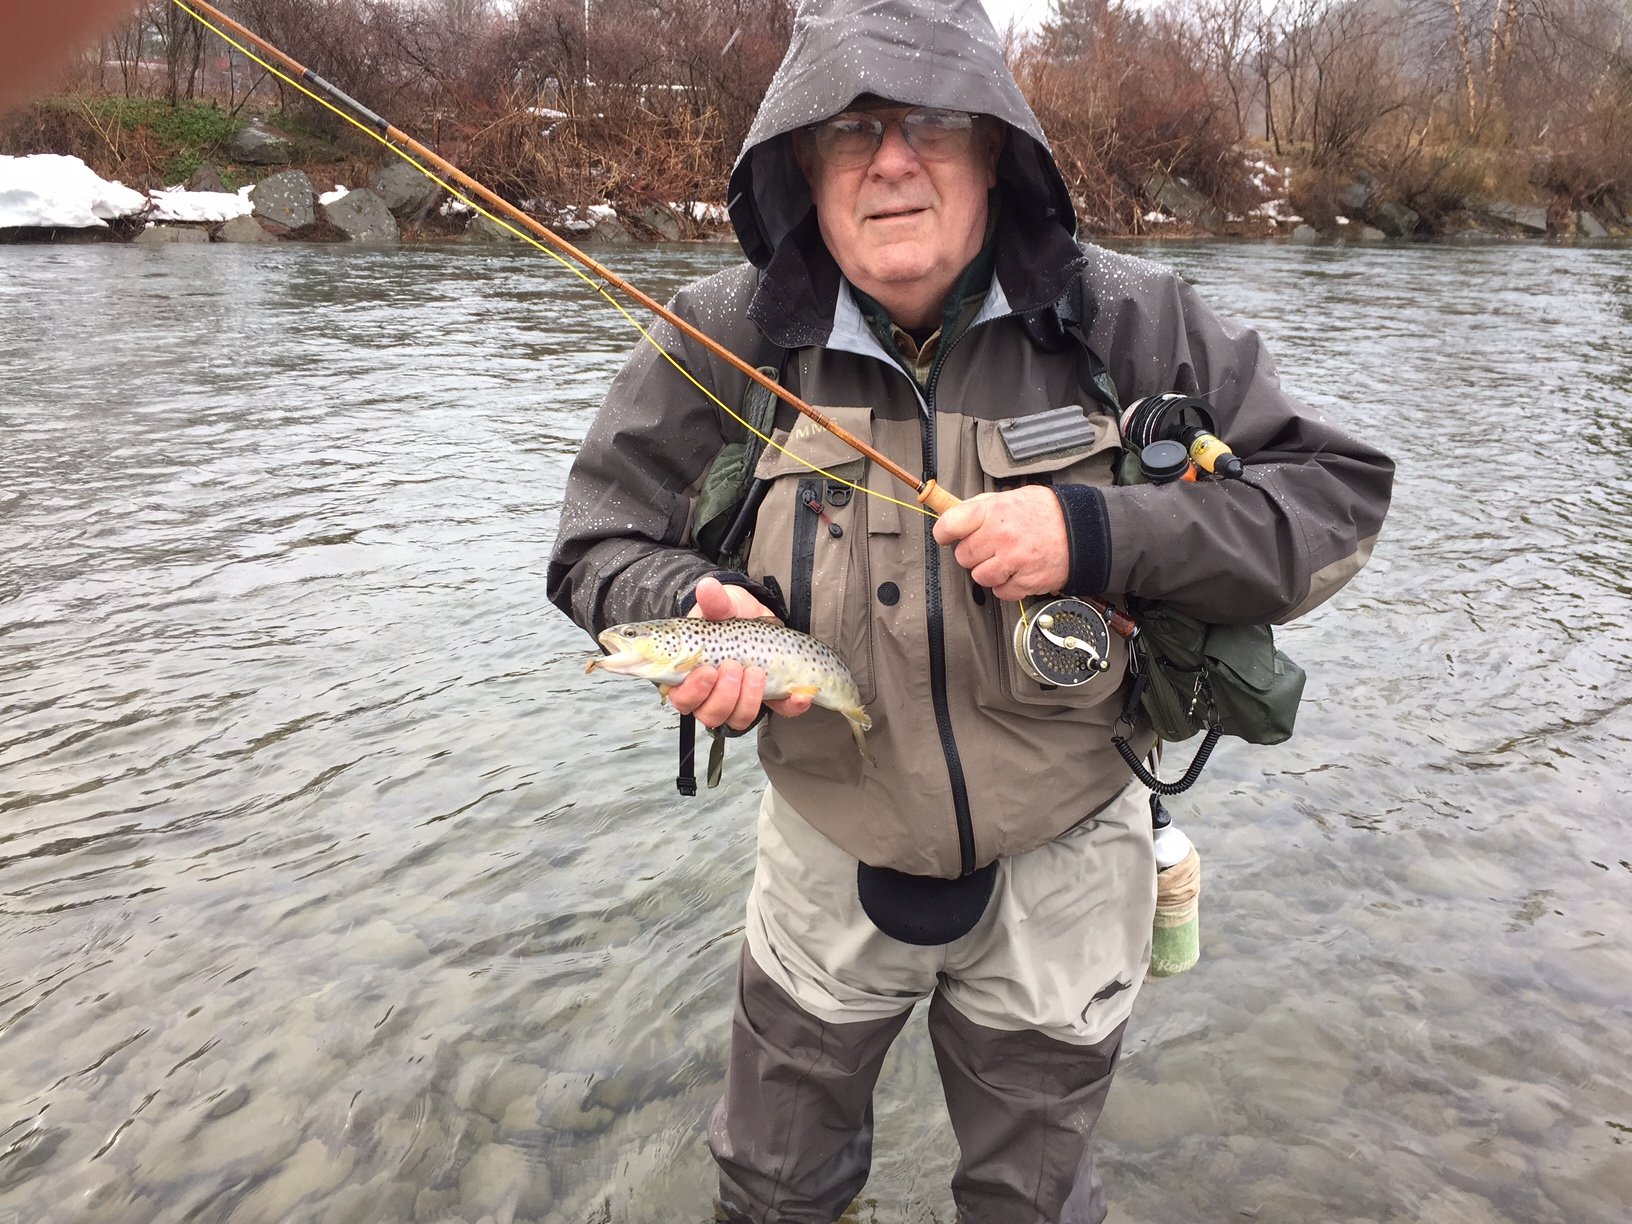 NY trout season opener What's the best bait, lure, artificial fly to